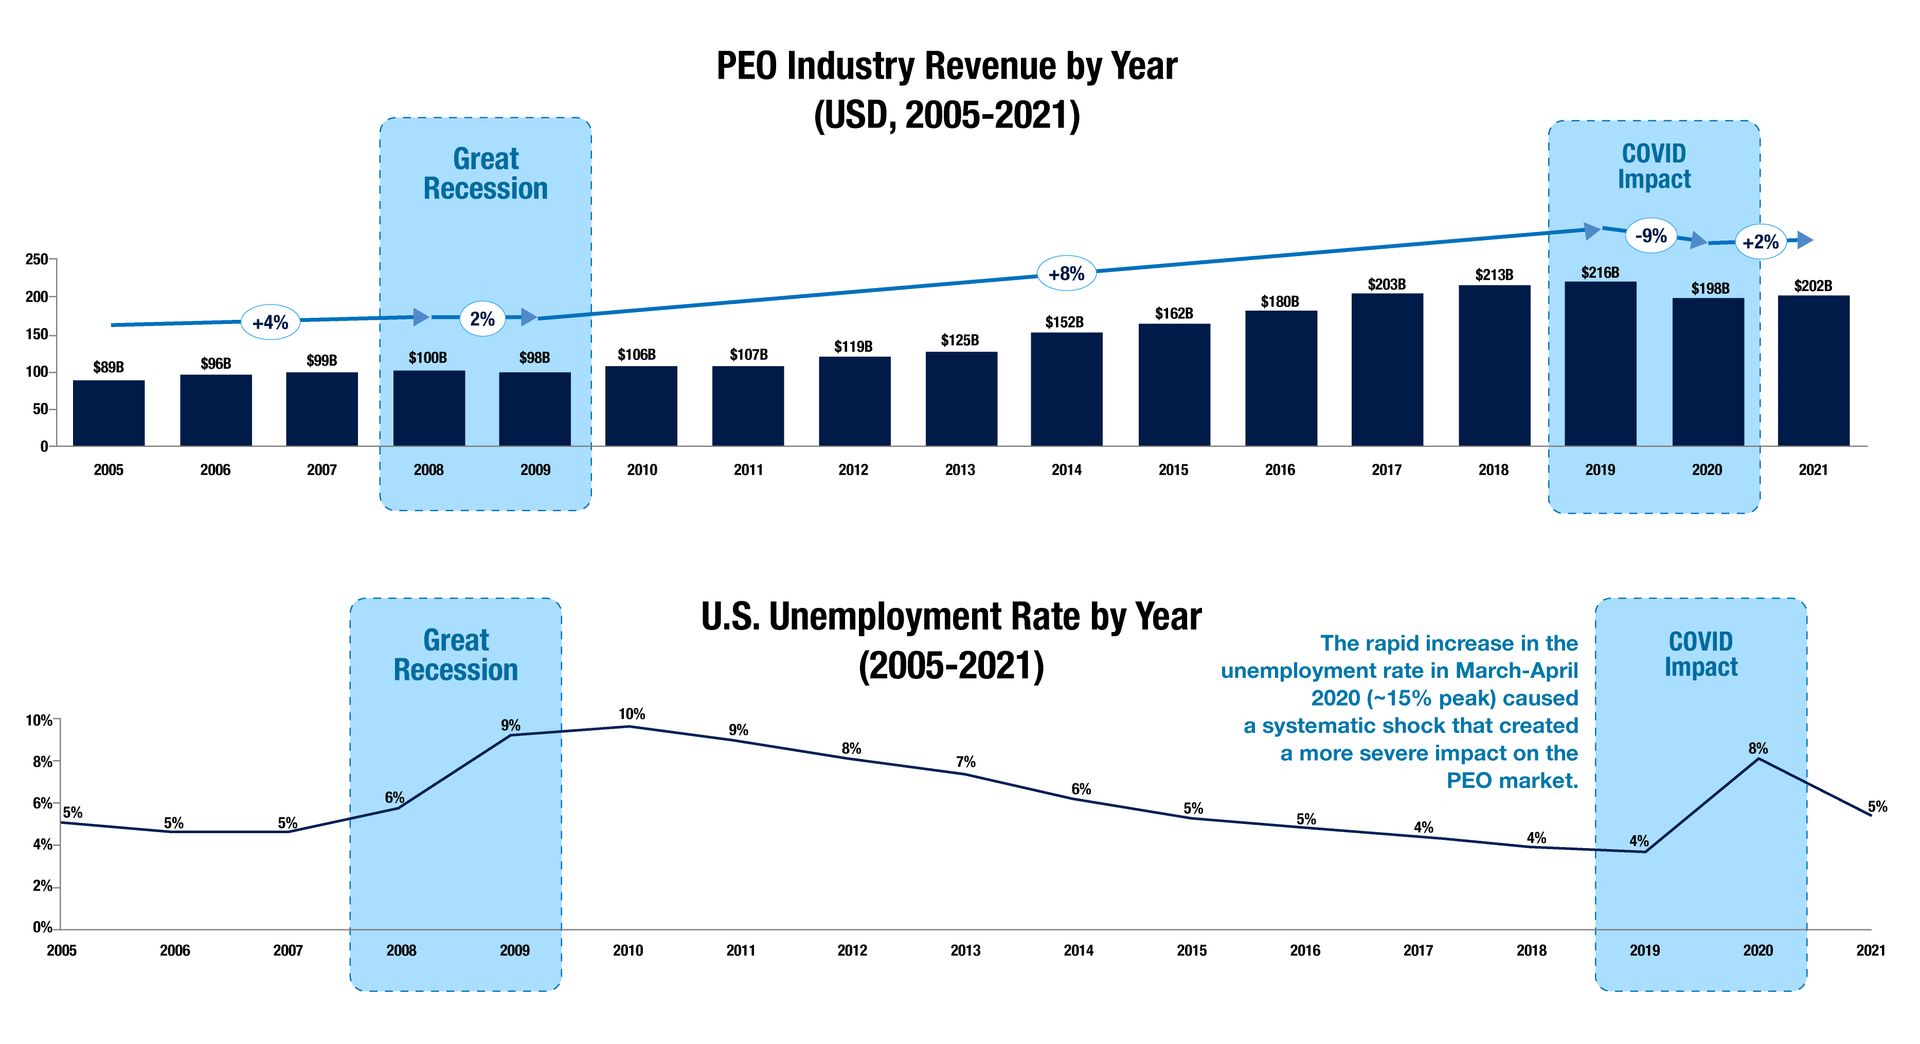 2 graphs with a trendline. Graph 1 is the PEO industry revenue by year (USD, 2005-2021), with steady growth and slow growth during COVID and the great recession. Graph 2 is  US unemployment rate by year (2005-2021) with a spike during the Great Recession and rapid increase during COVID. 